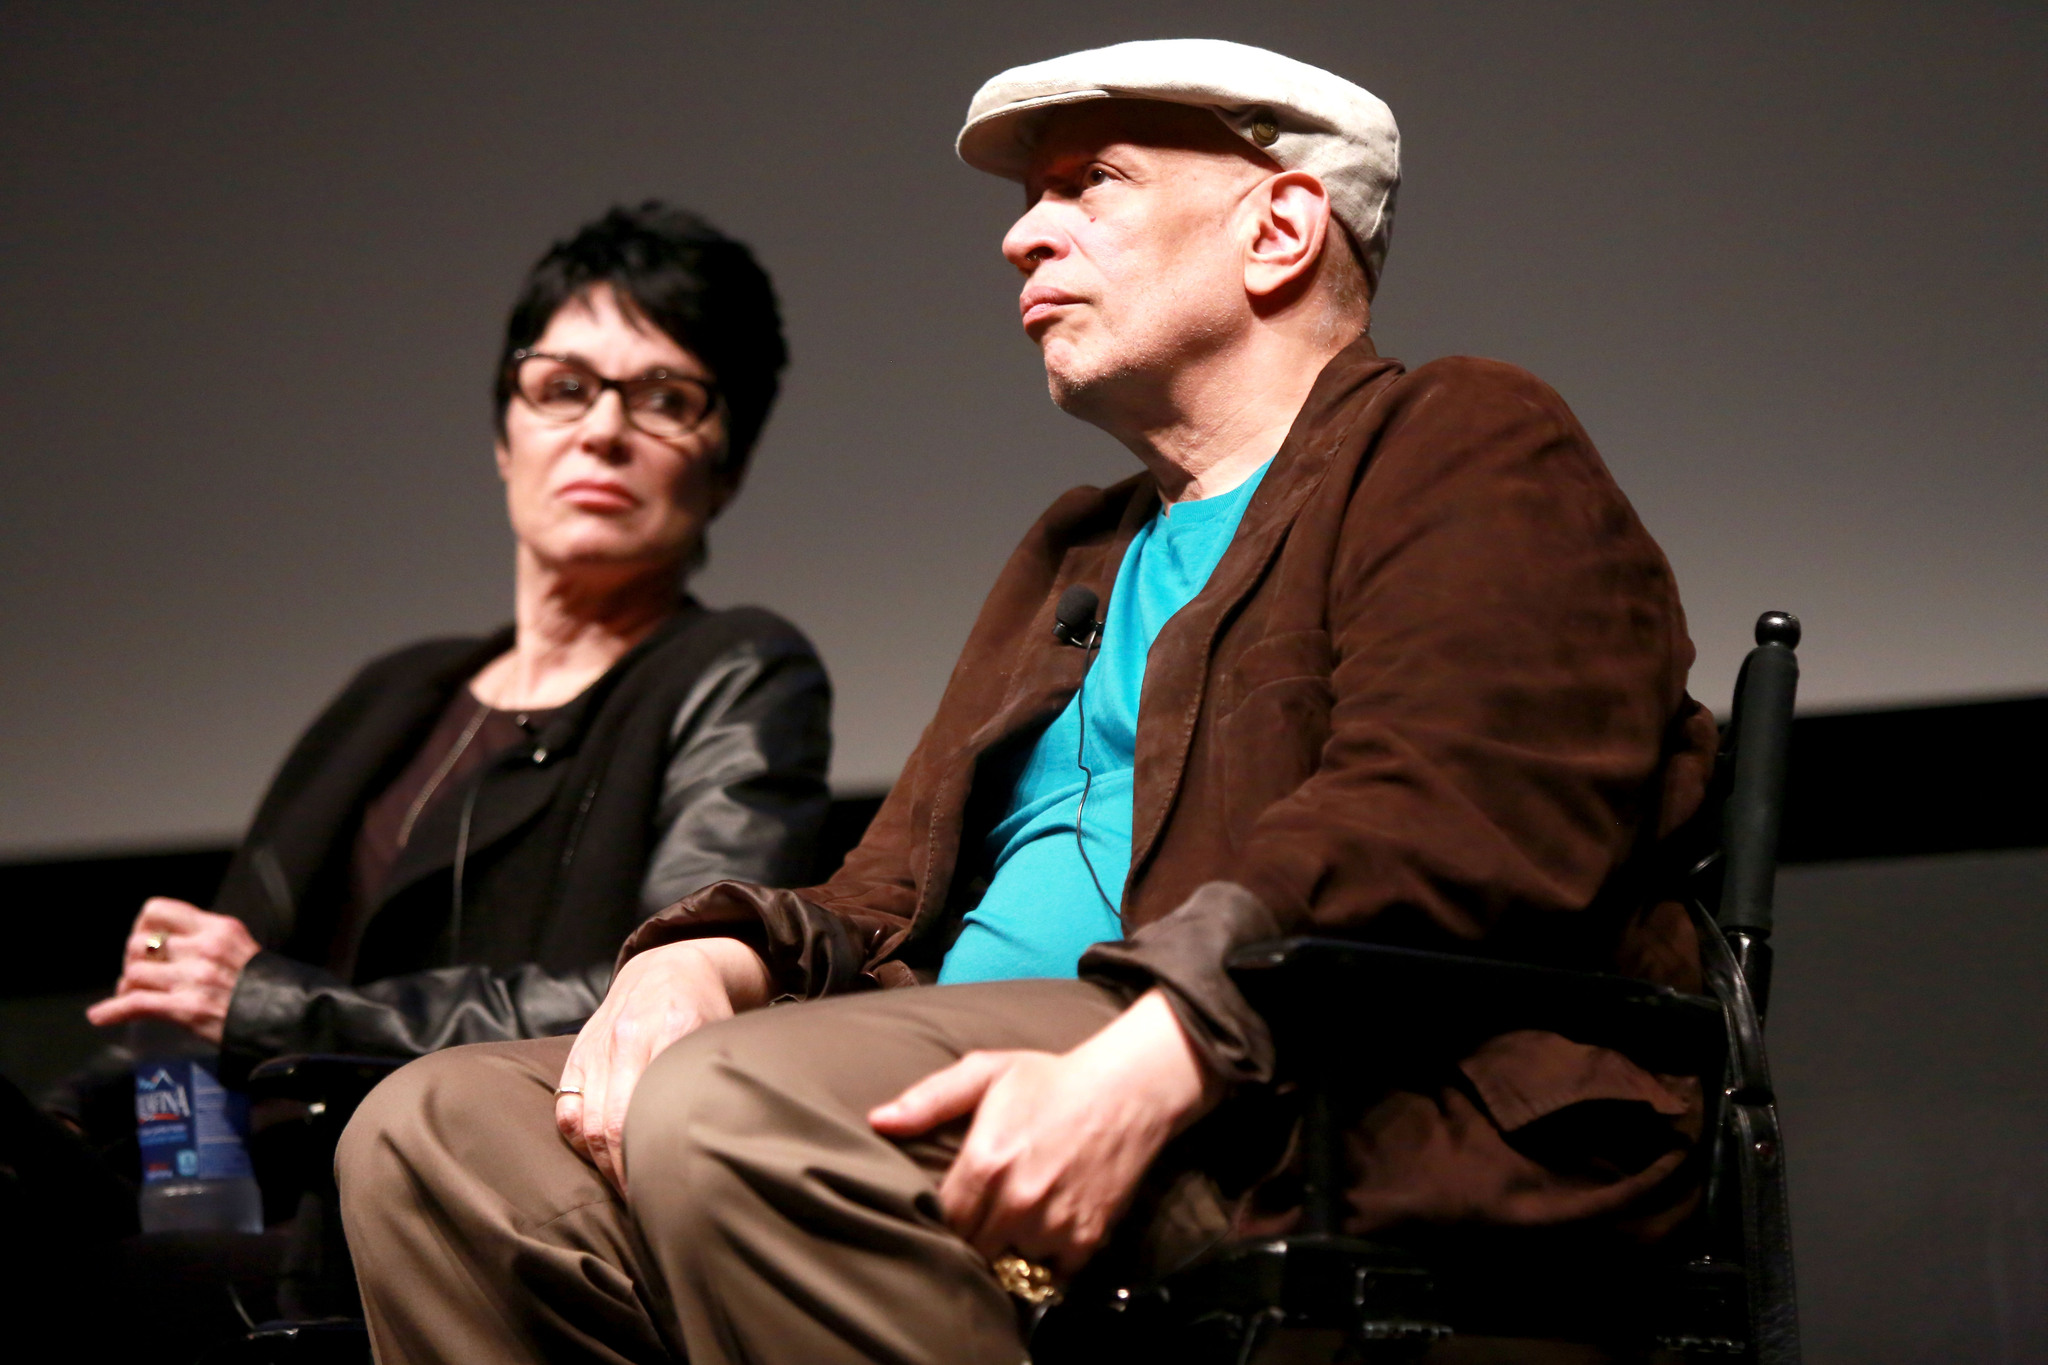 Jennifer Lee and Walter Mosley at event of Richard Pryor: Omit the Logic (2013)